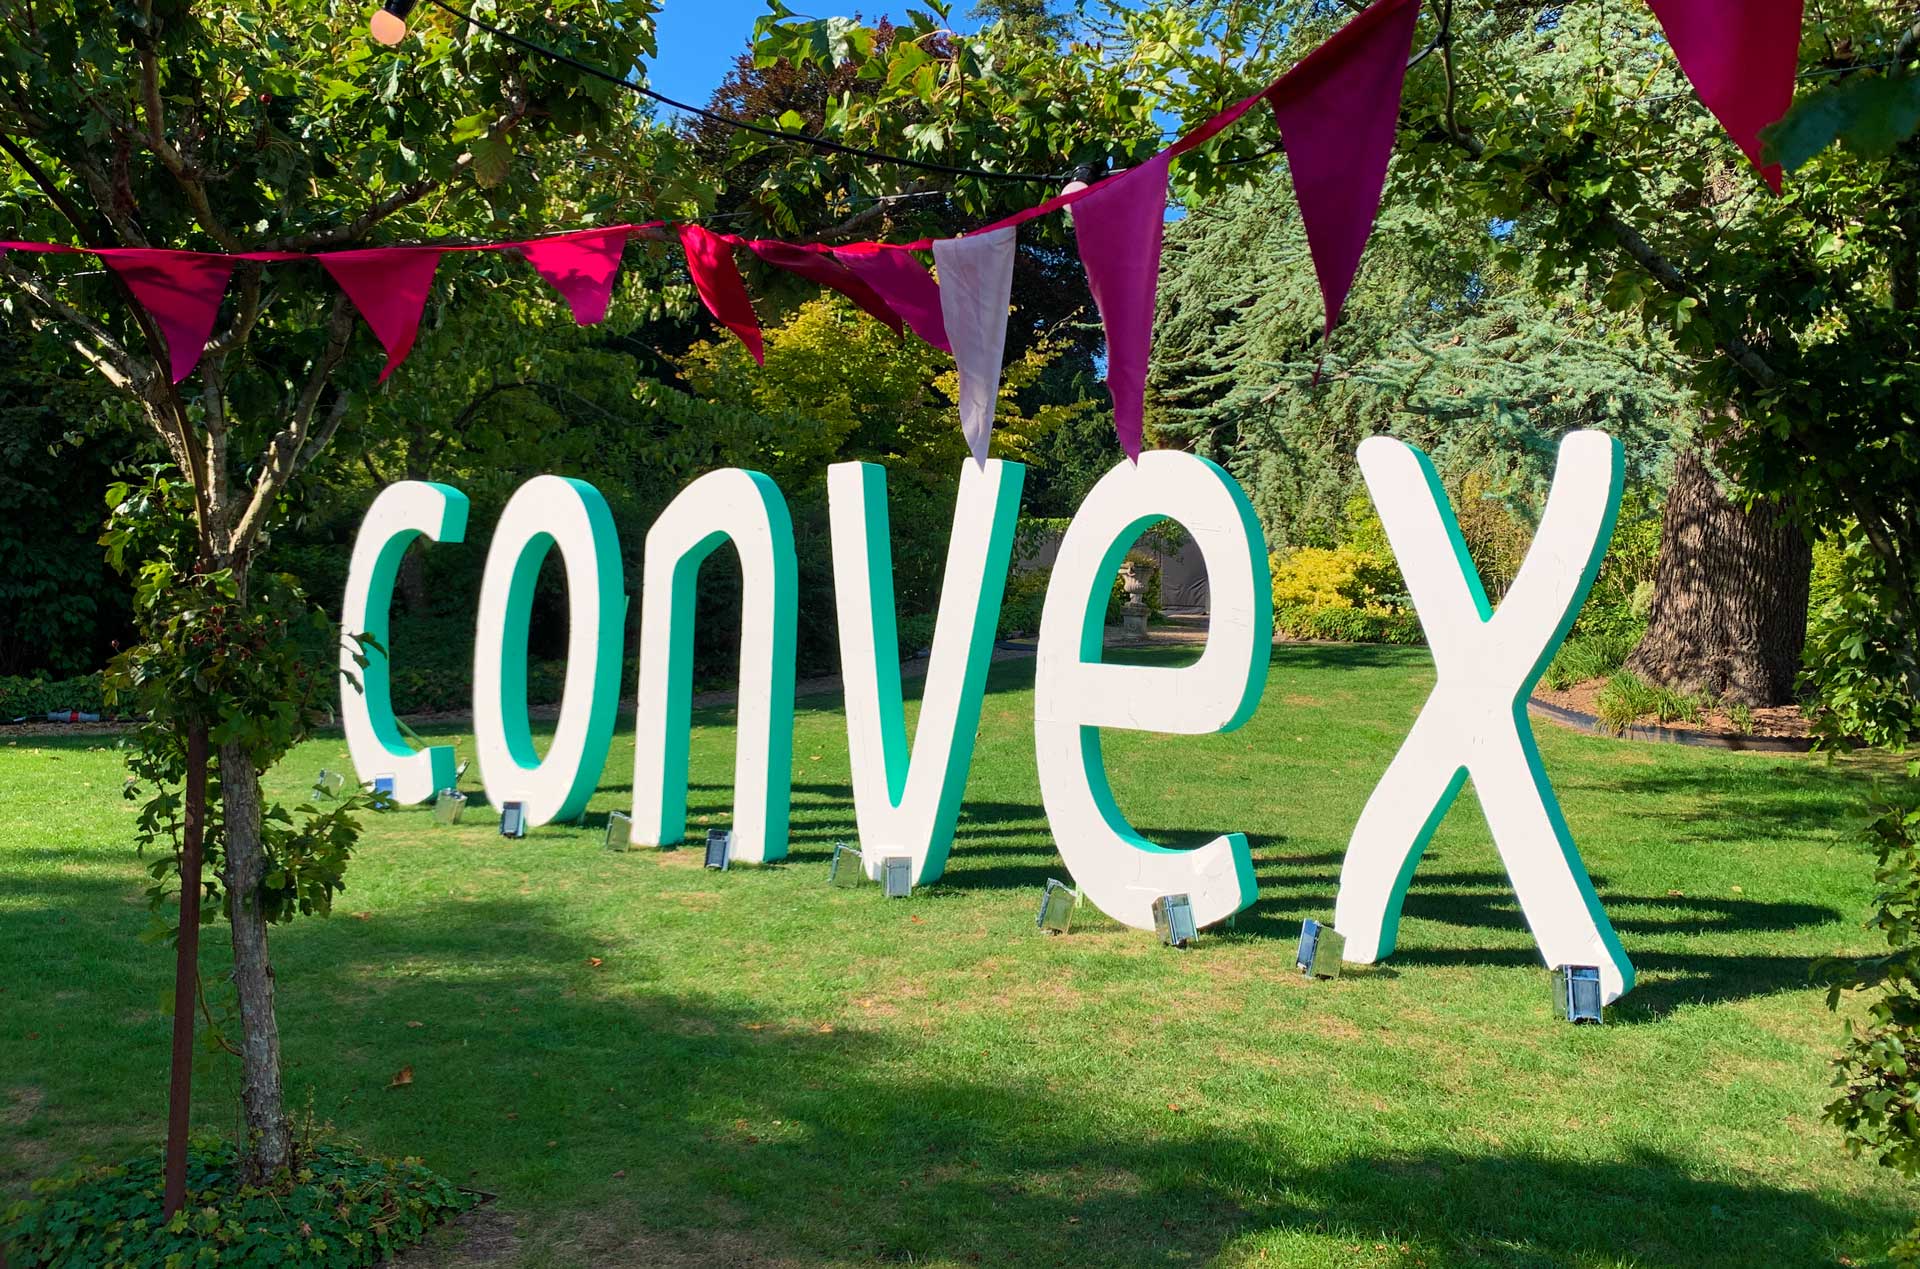 Large format letters with bunting in the foreground